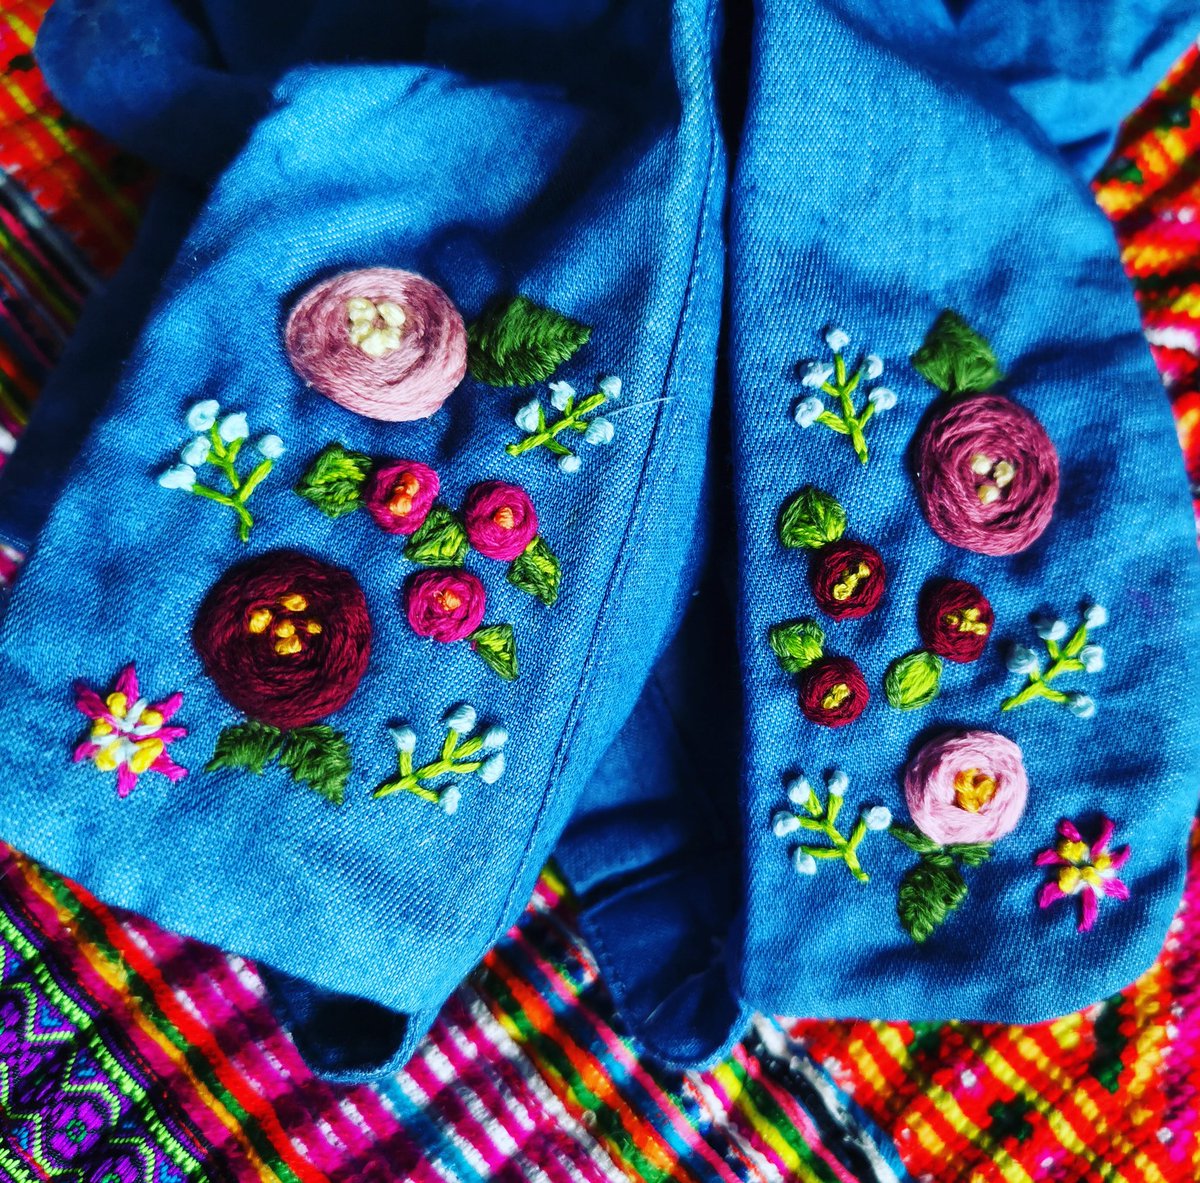 Diy clothing 🌸
#handembroidery #embroider #keepcraftingcarryon #crafting #handmade #flowerart #flowerembroidery #embroider